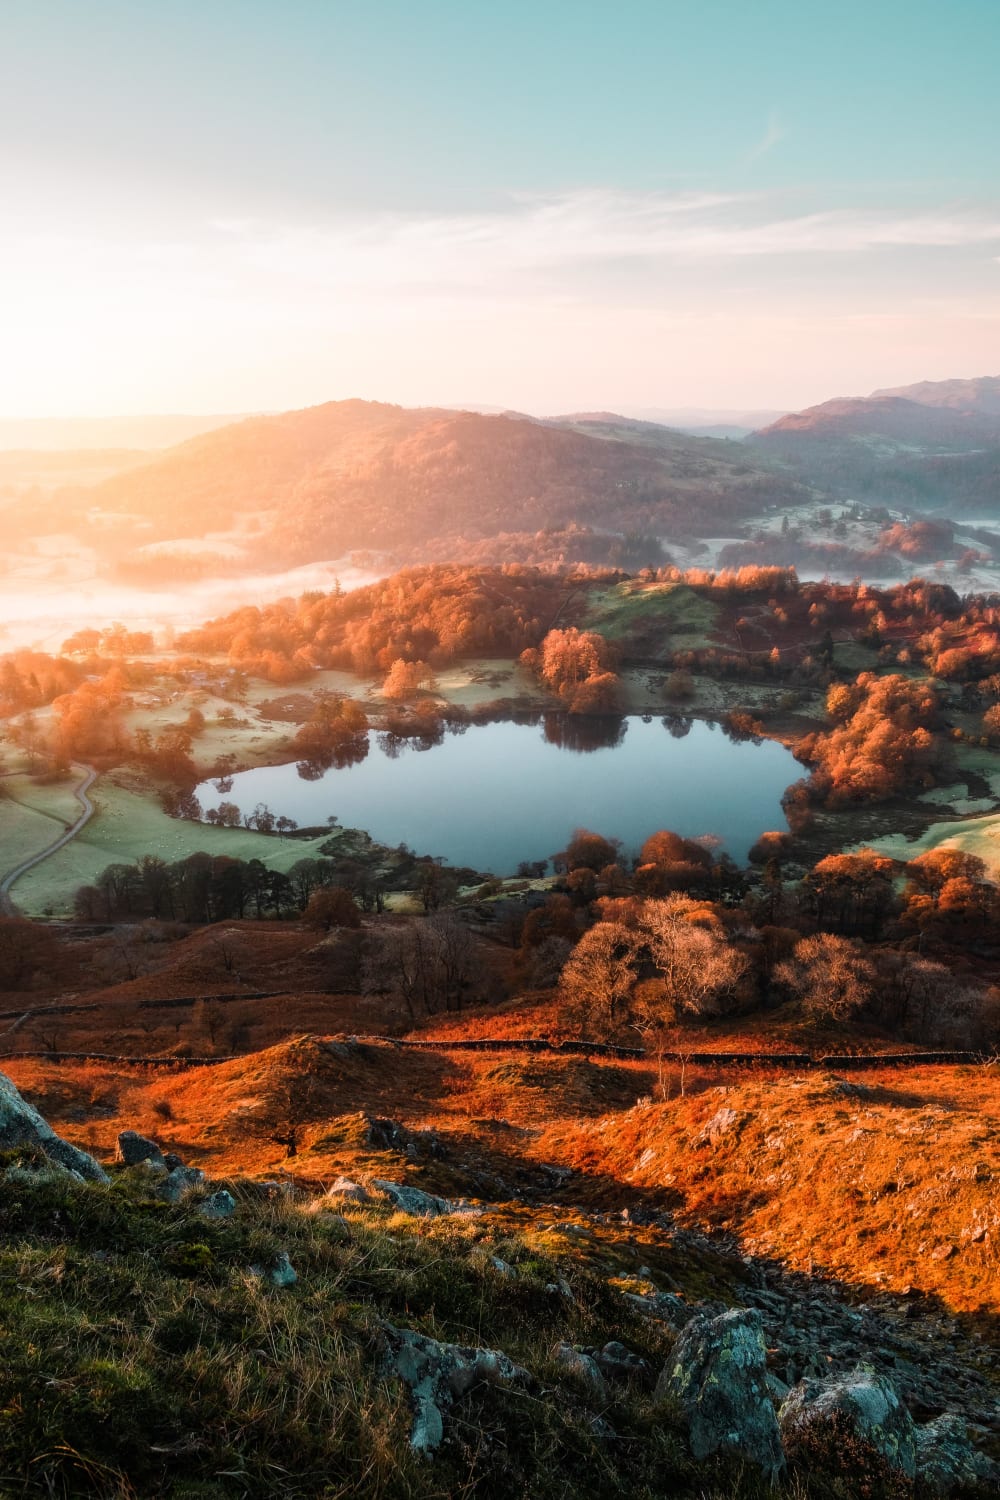 I hiked up here at 6am to photograph this amazing sunrise in the Lake District, UK!